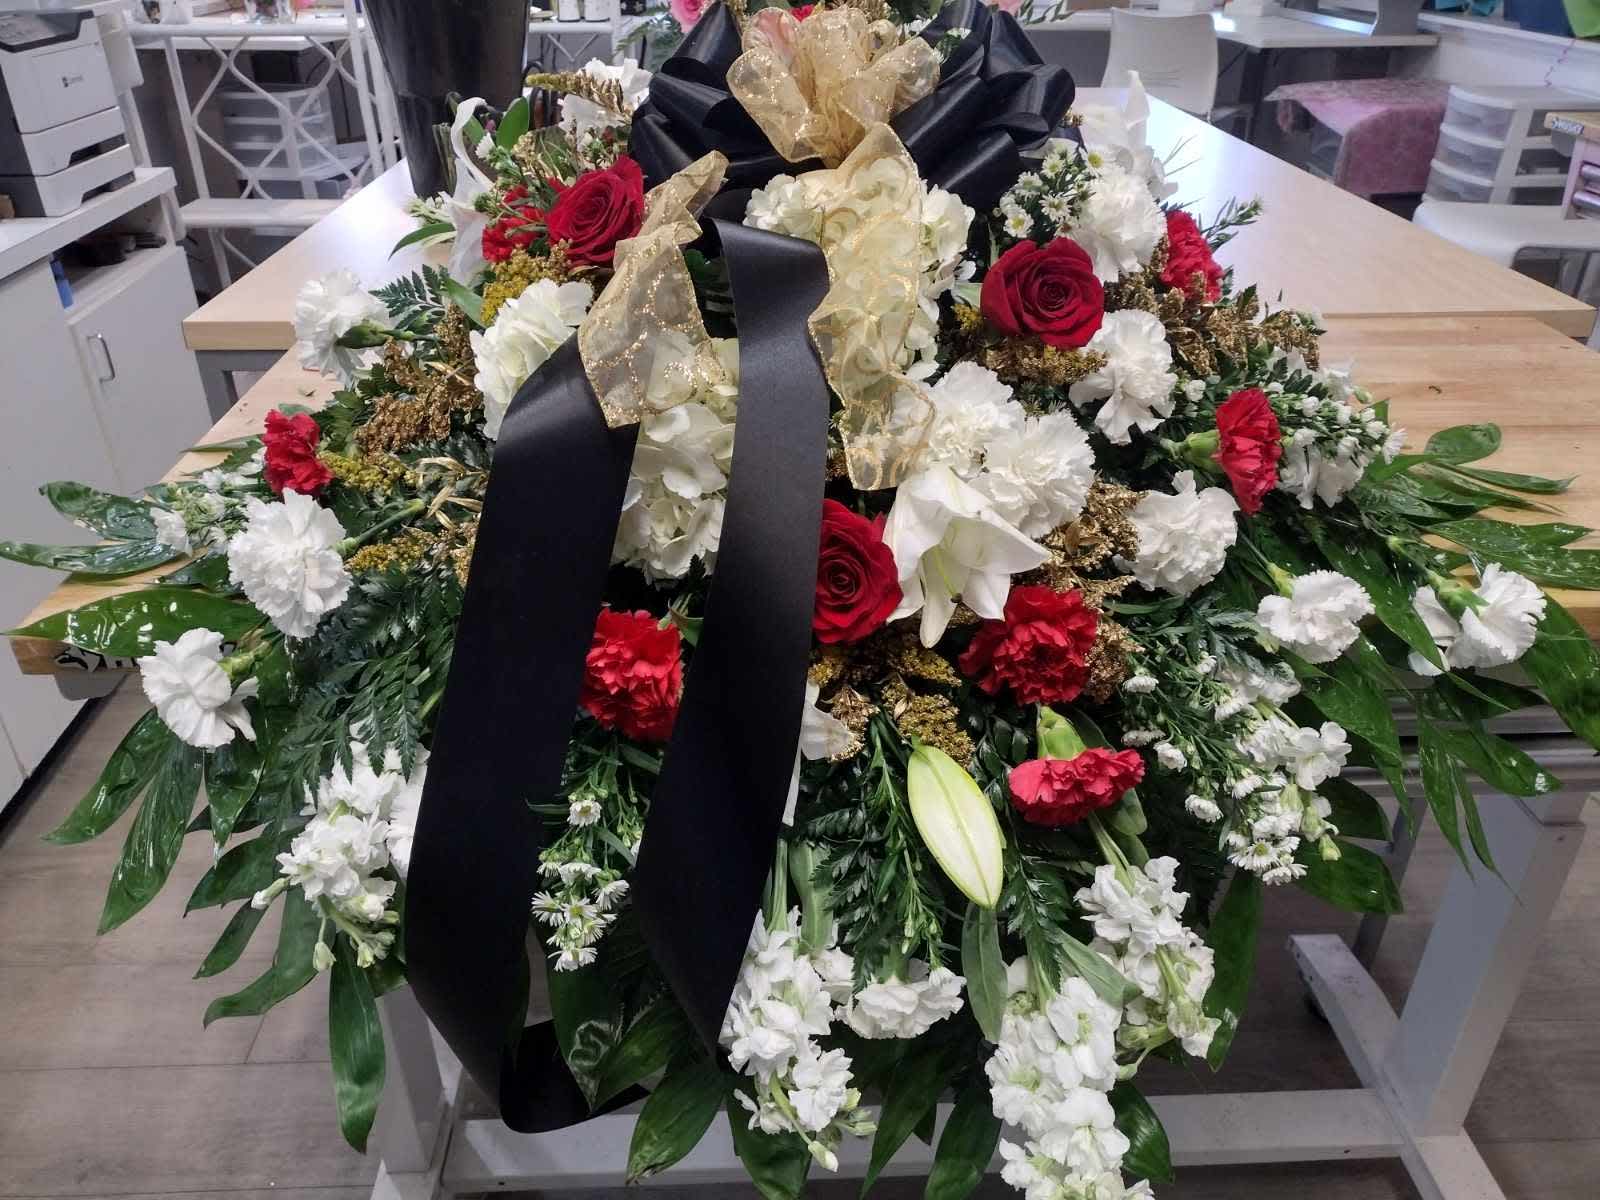 Red, Black, White Casket Spray - Red/white carnations, white lillies, white stock, gold leaves, lush greenery all tied together with a beautiful black and gold bow.